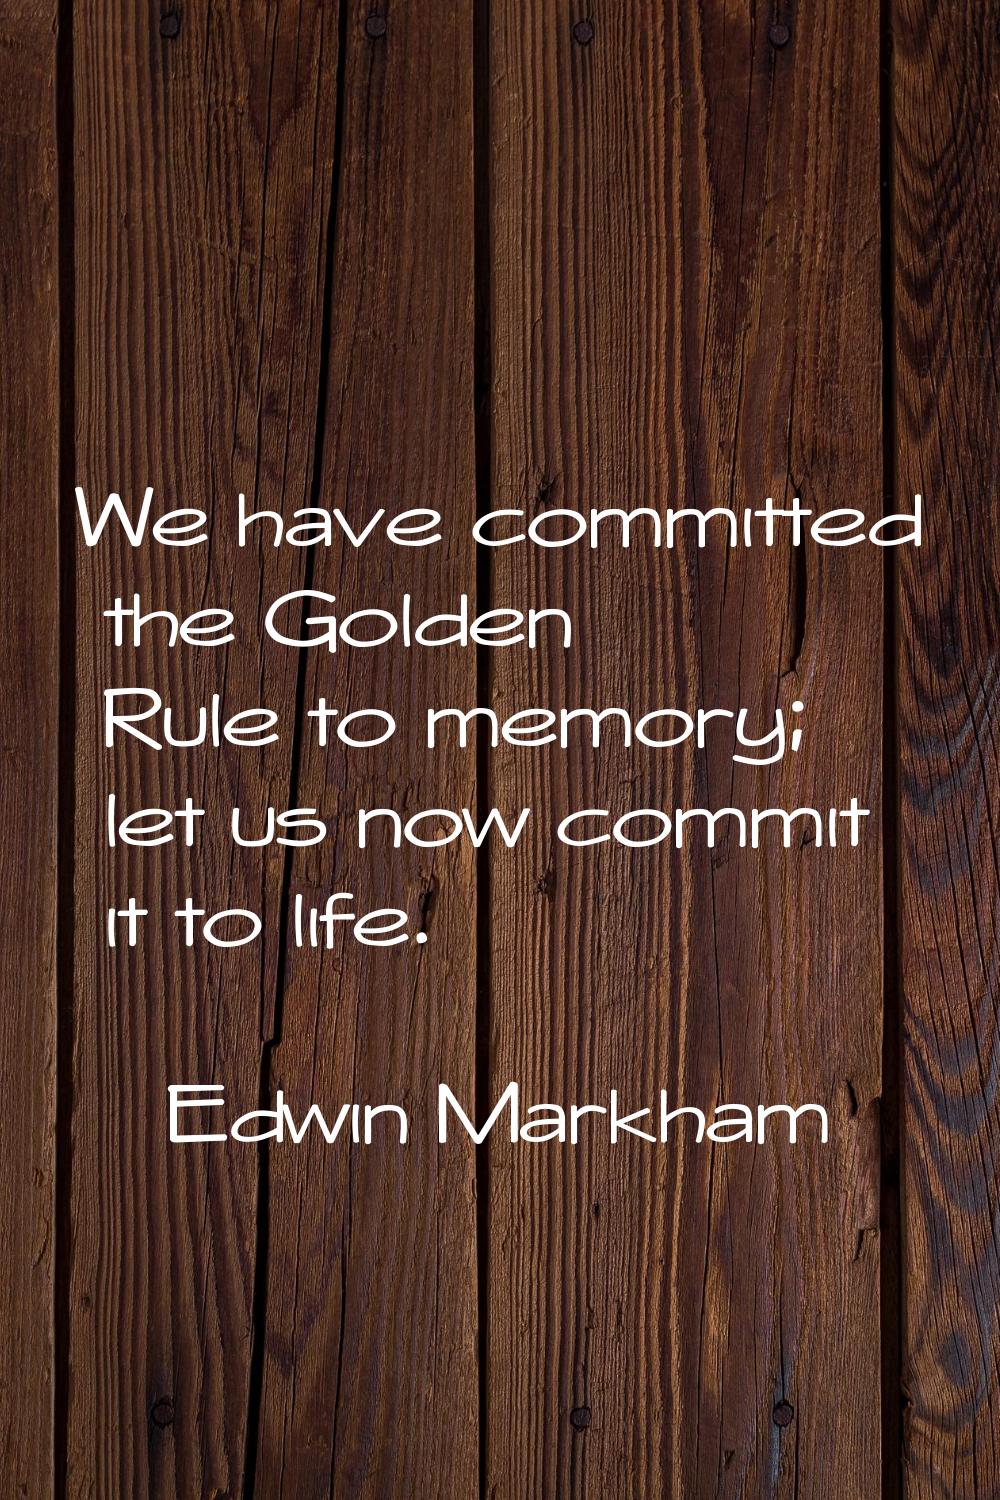 We have committed the Golden Rule to memory; let us now commit it to life.